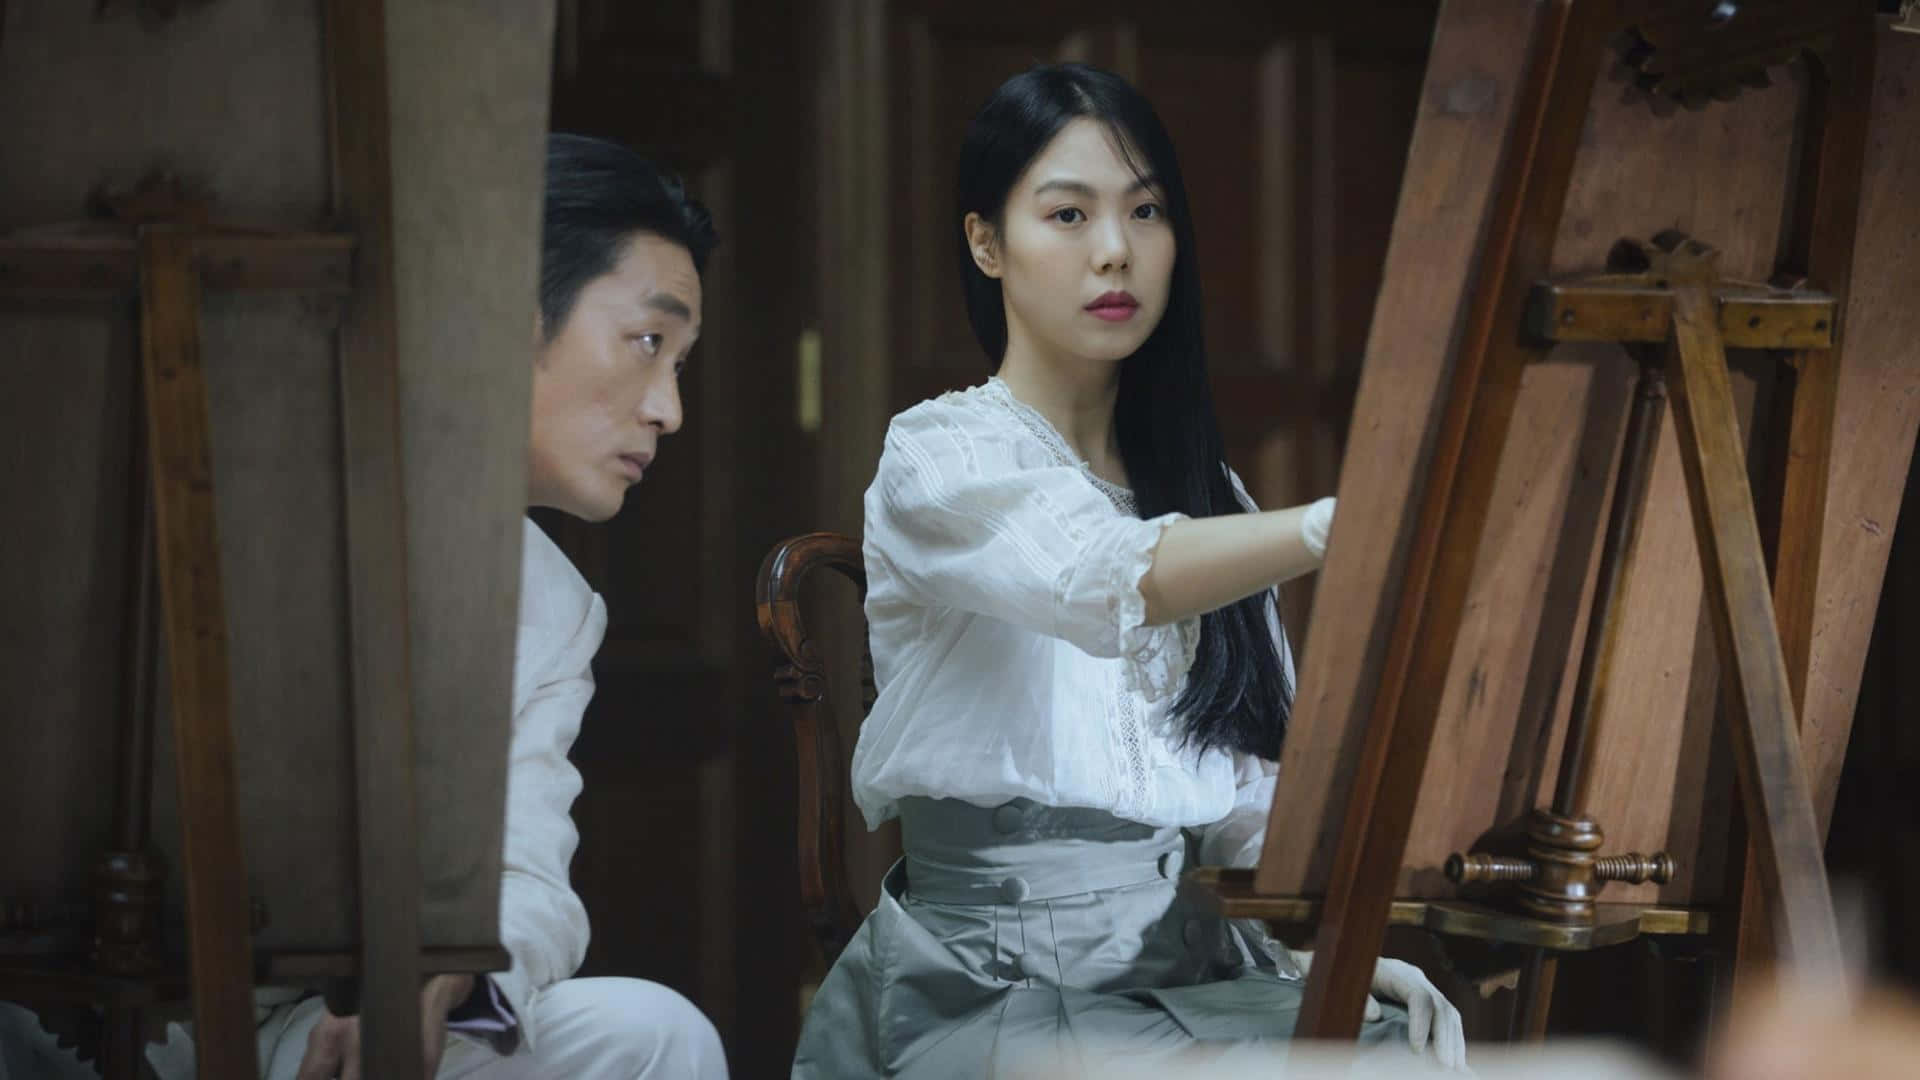 An Enigmatic Scene From The Movie The Handmaiden Wallpaper